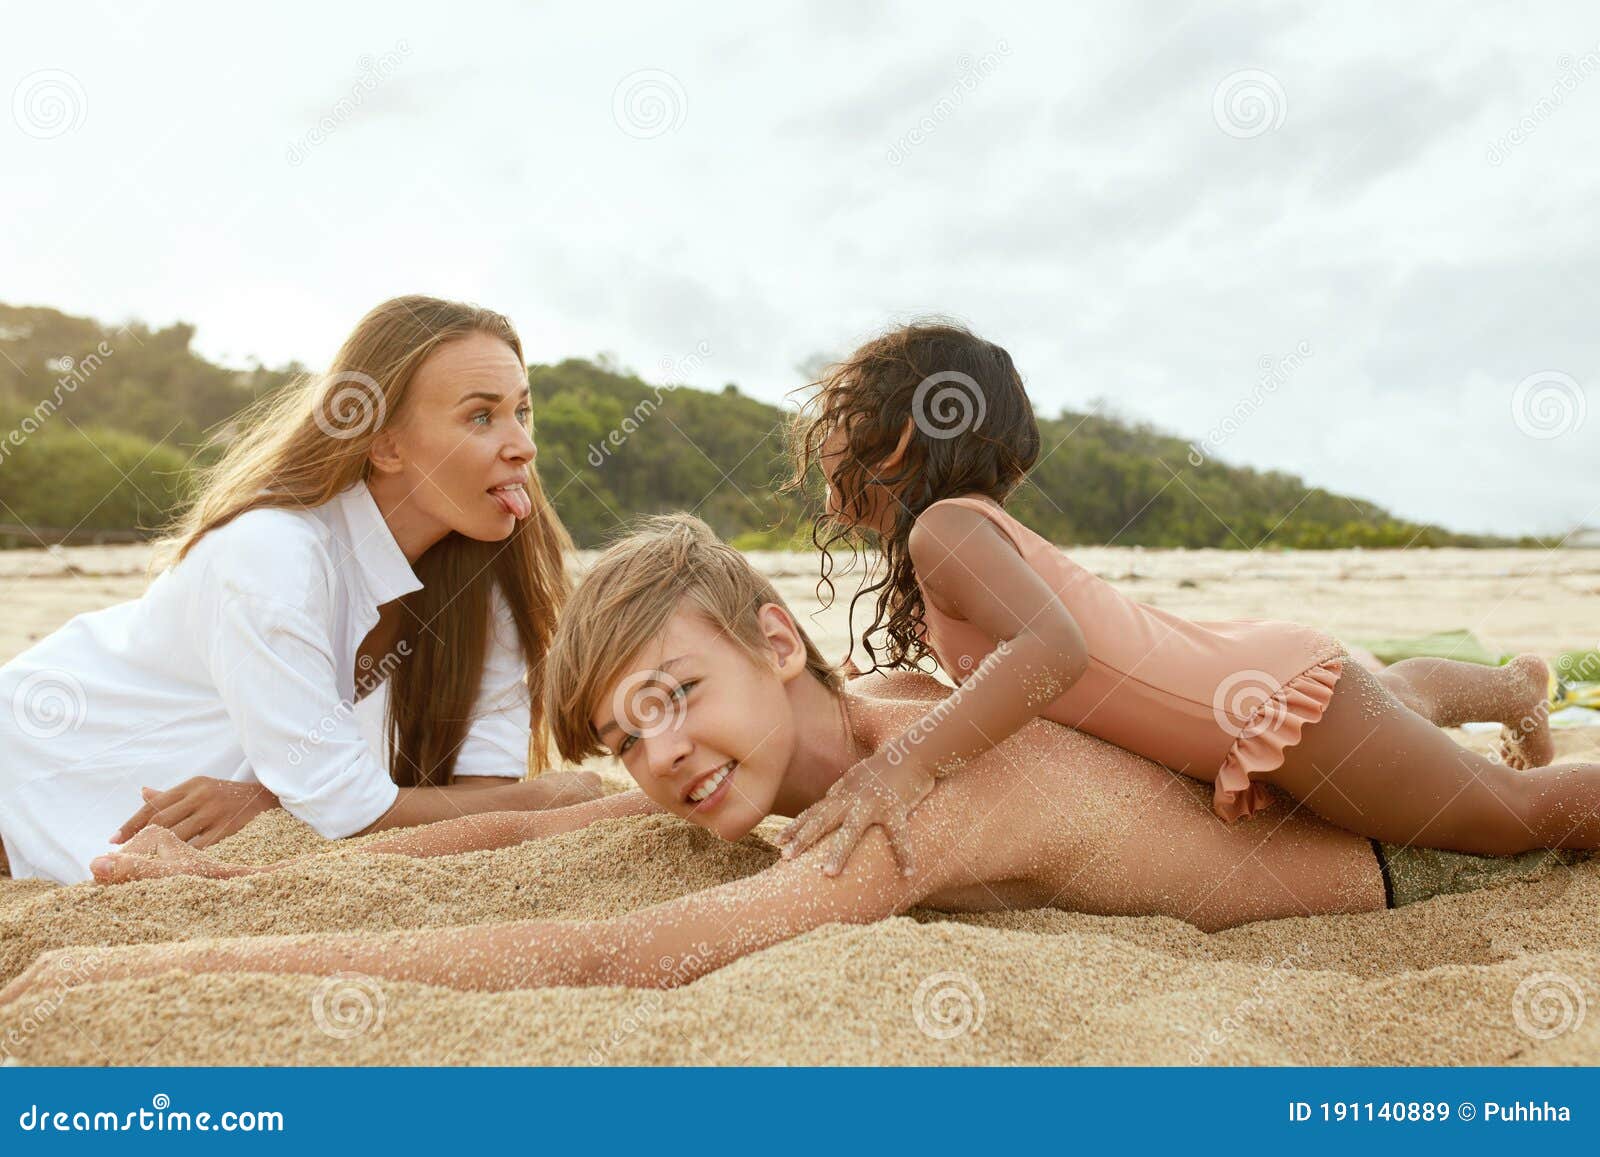 Naked families at the beach